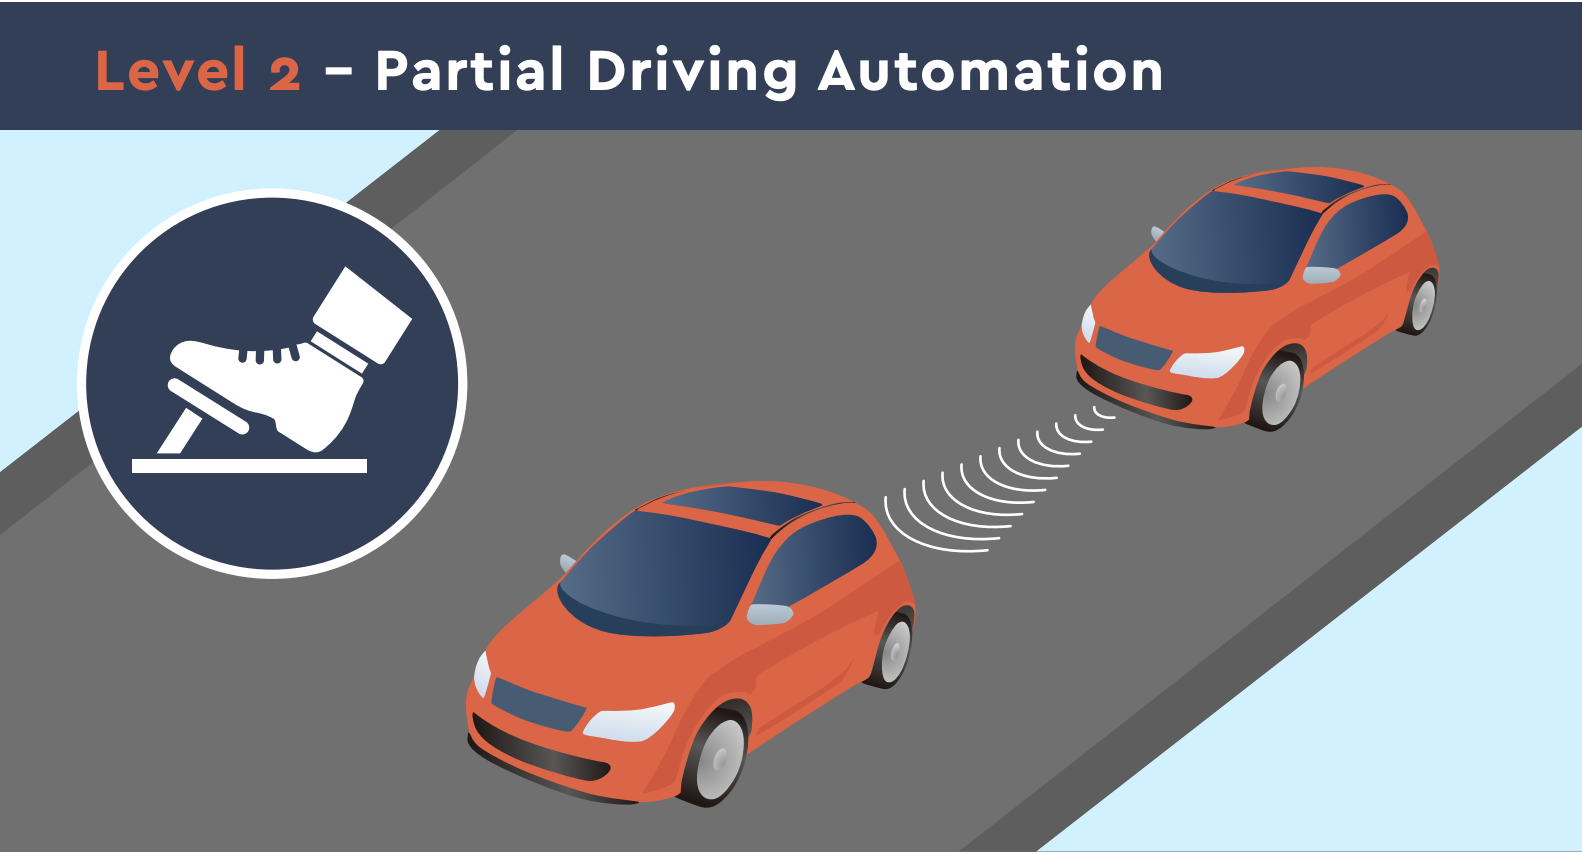 Partial Driving Automation